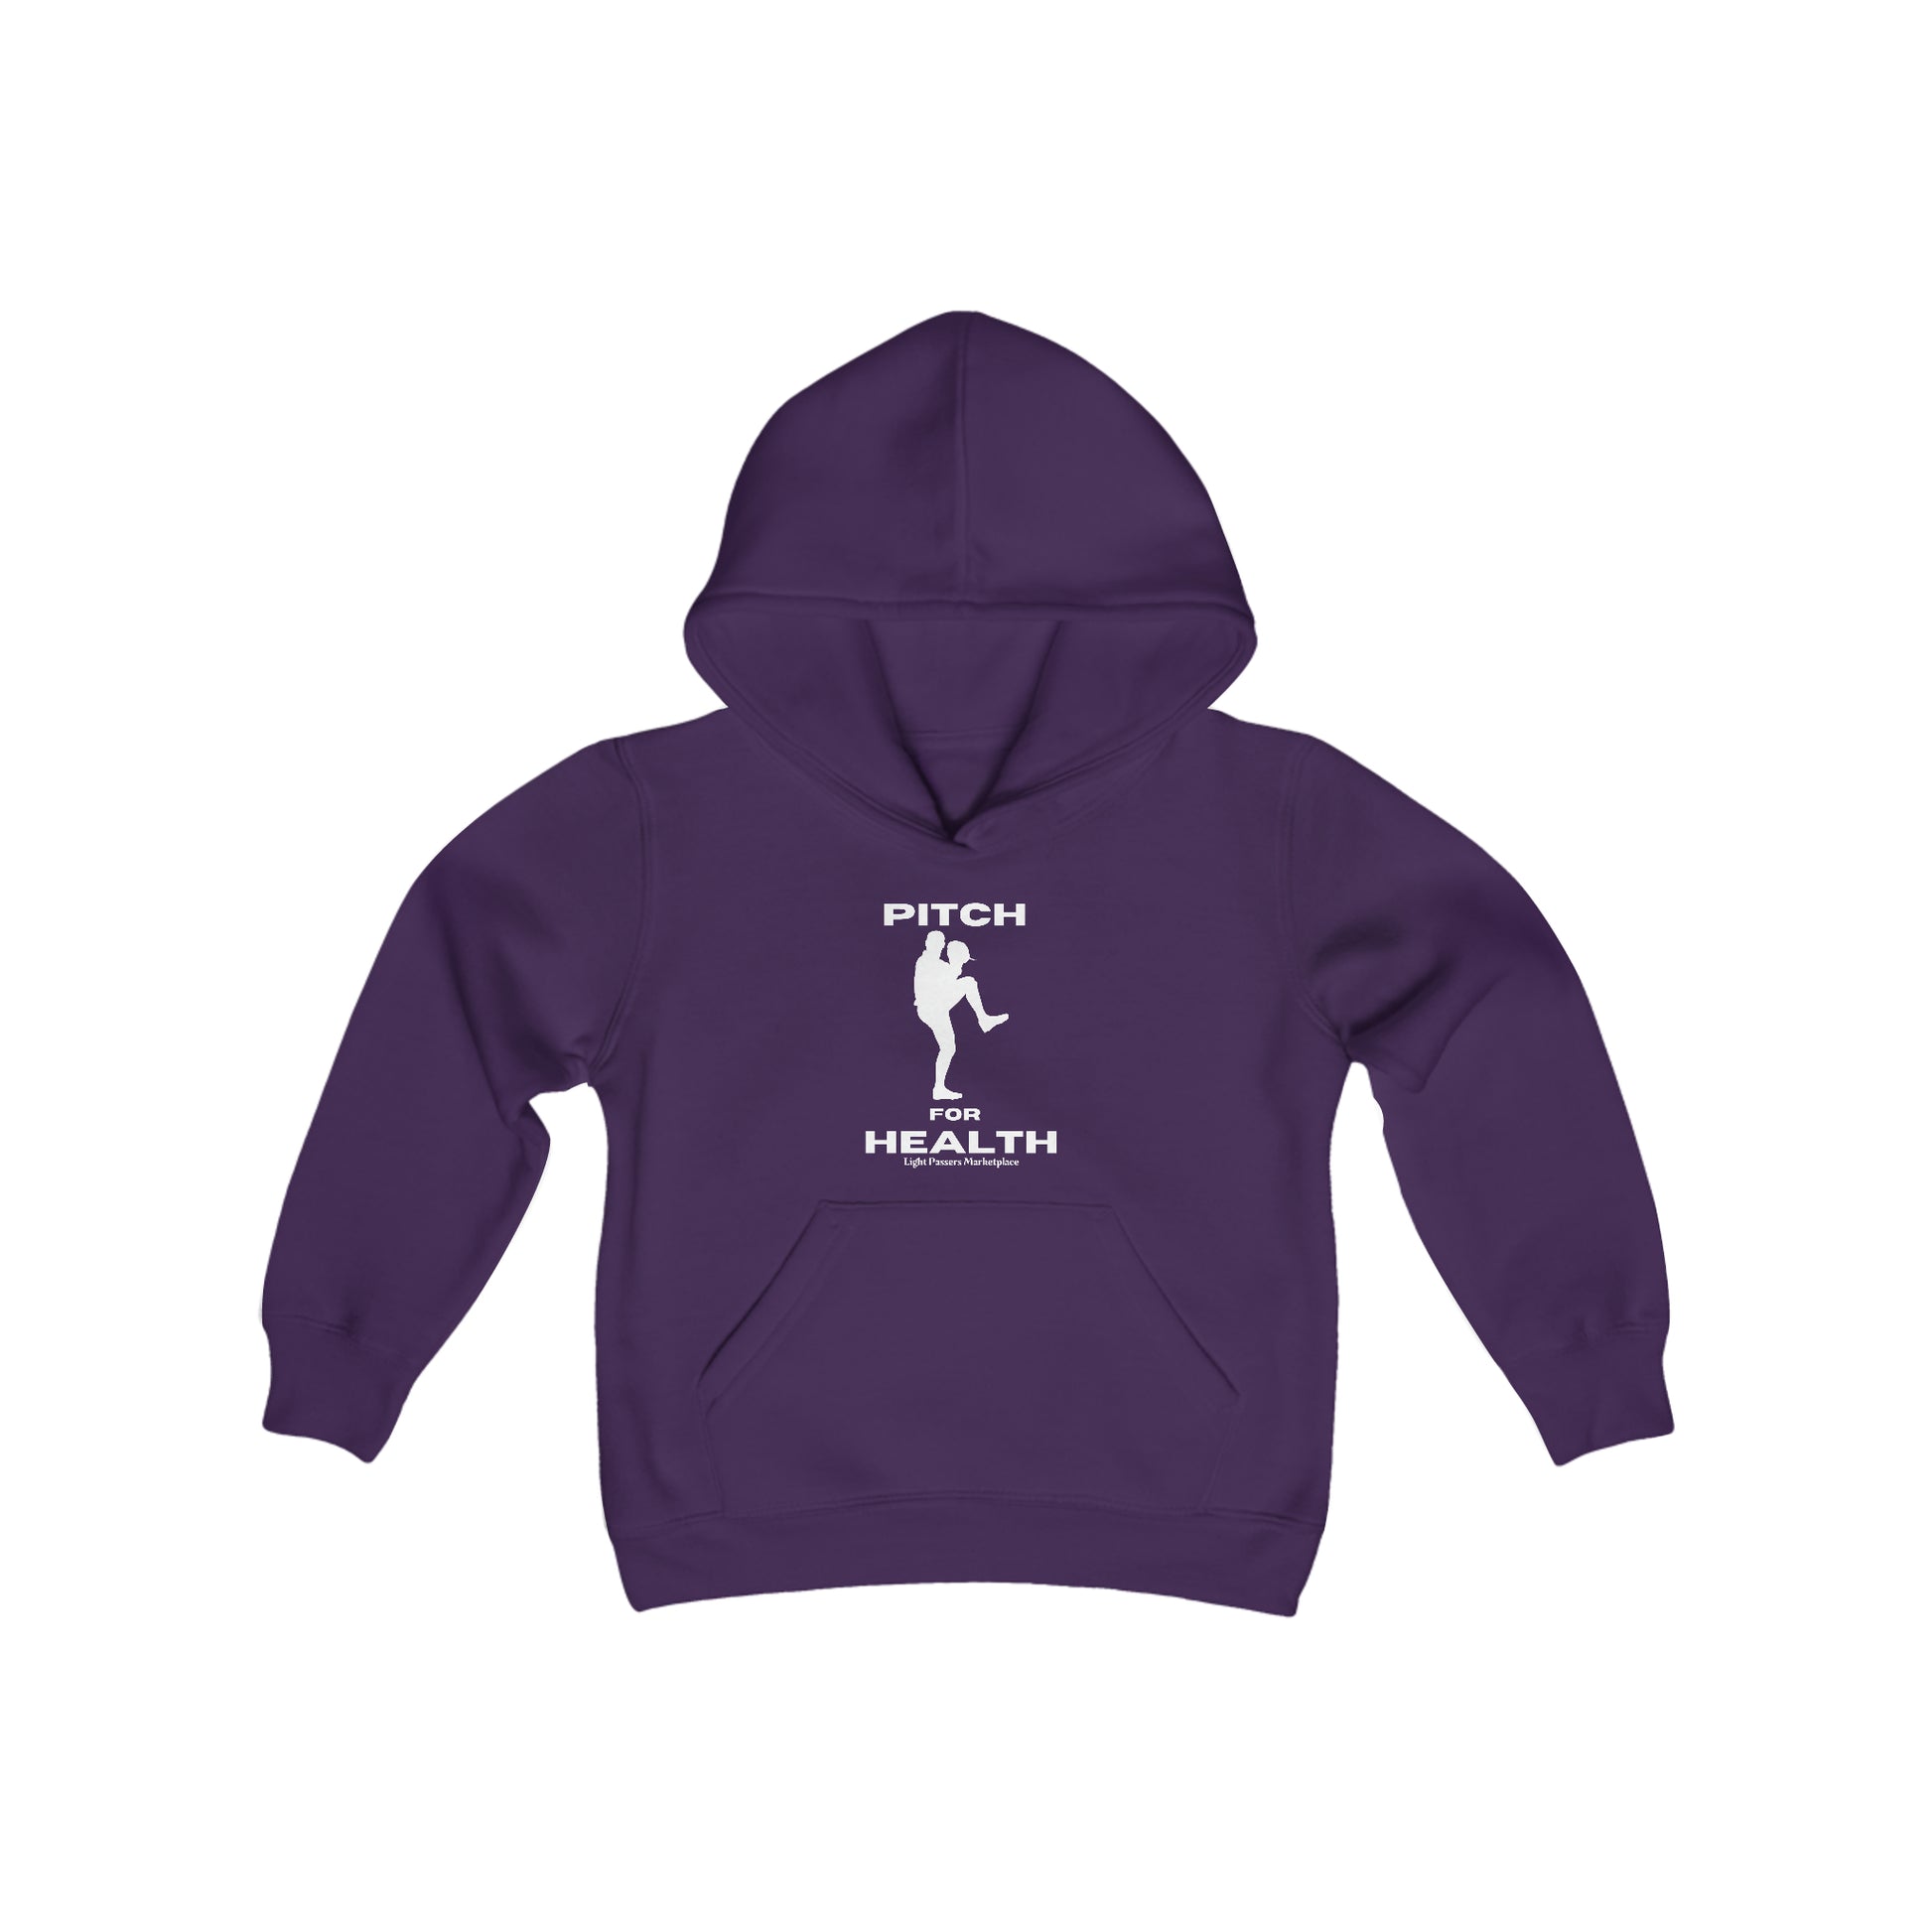 Youth blend hooded sweatshirt with kangaroo pocket, reinforced neck, and soft fleece fabric. 50% cotton, 50% polyester for reduced lint buildup. Ideal for printing.